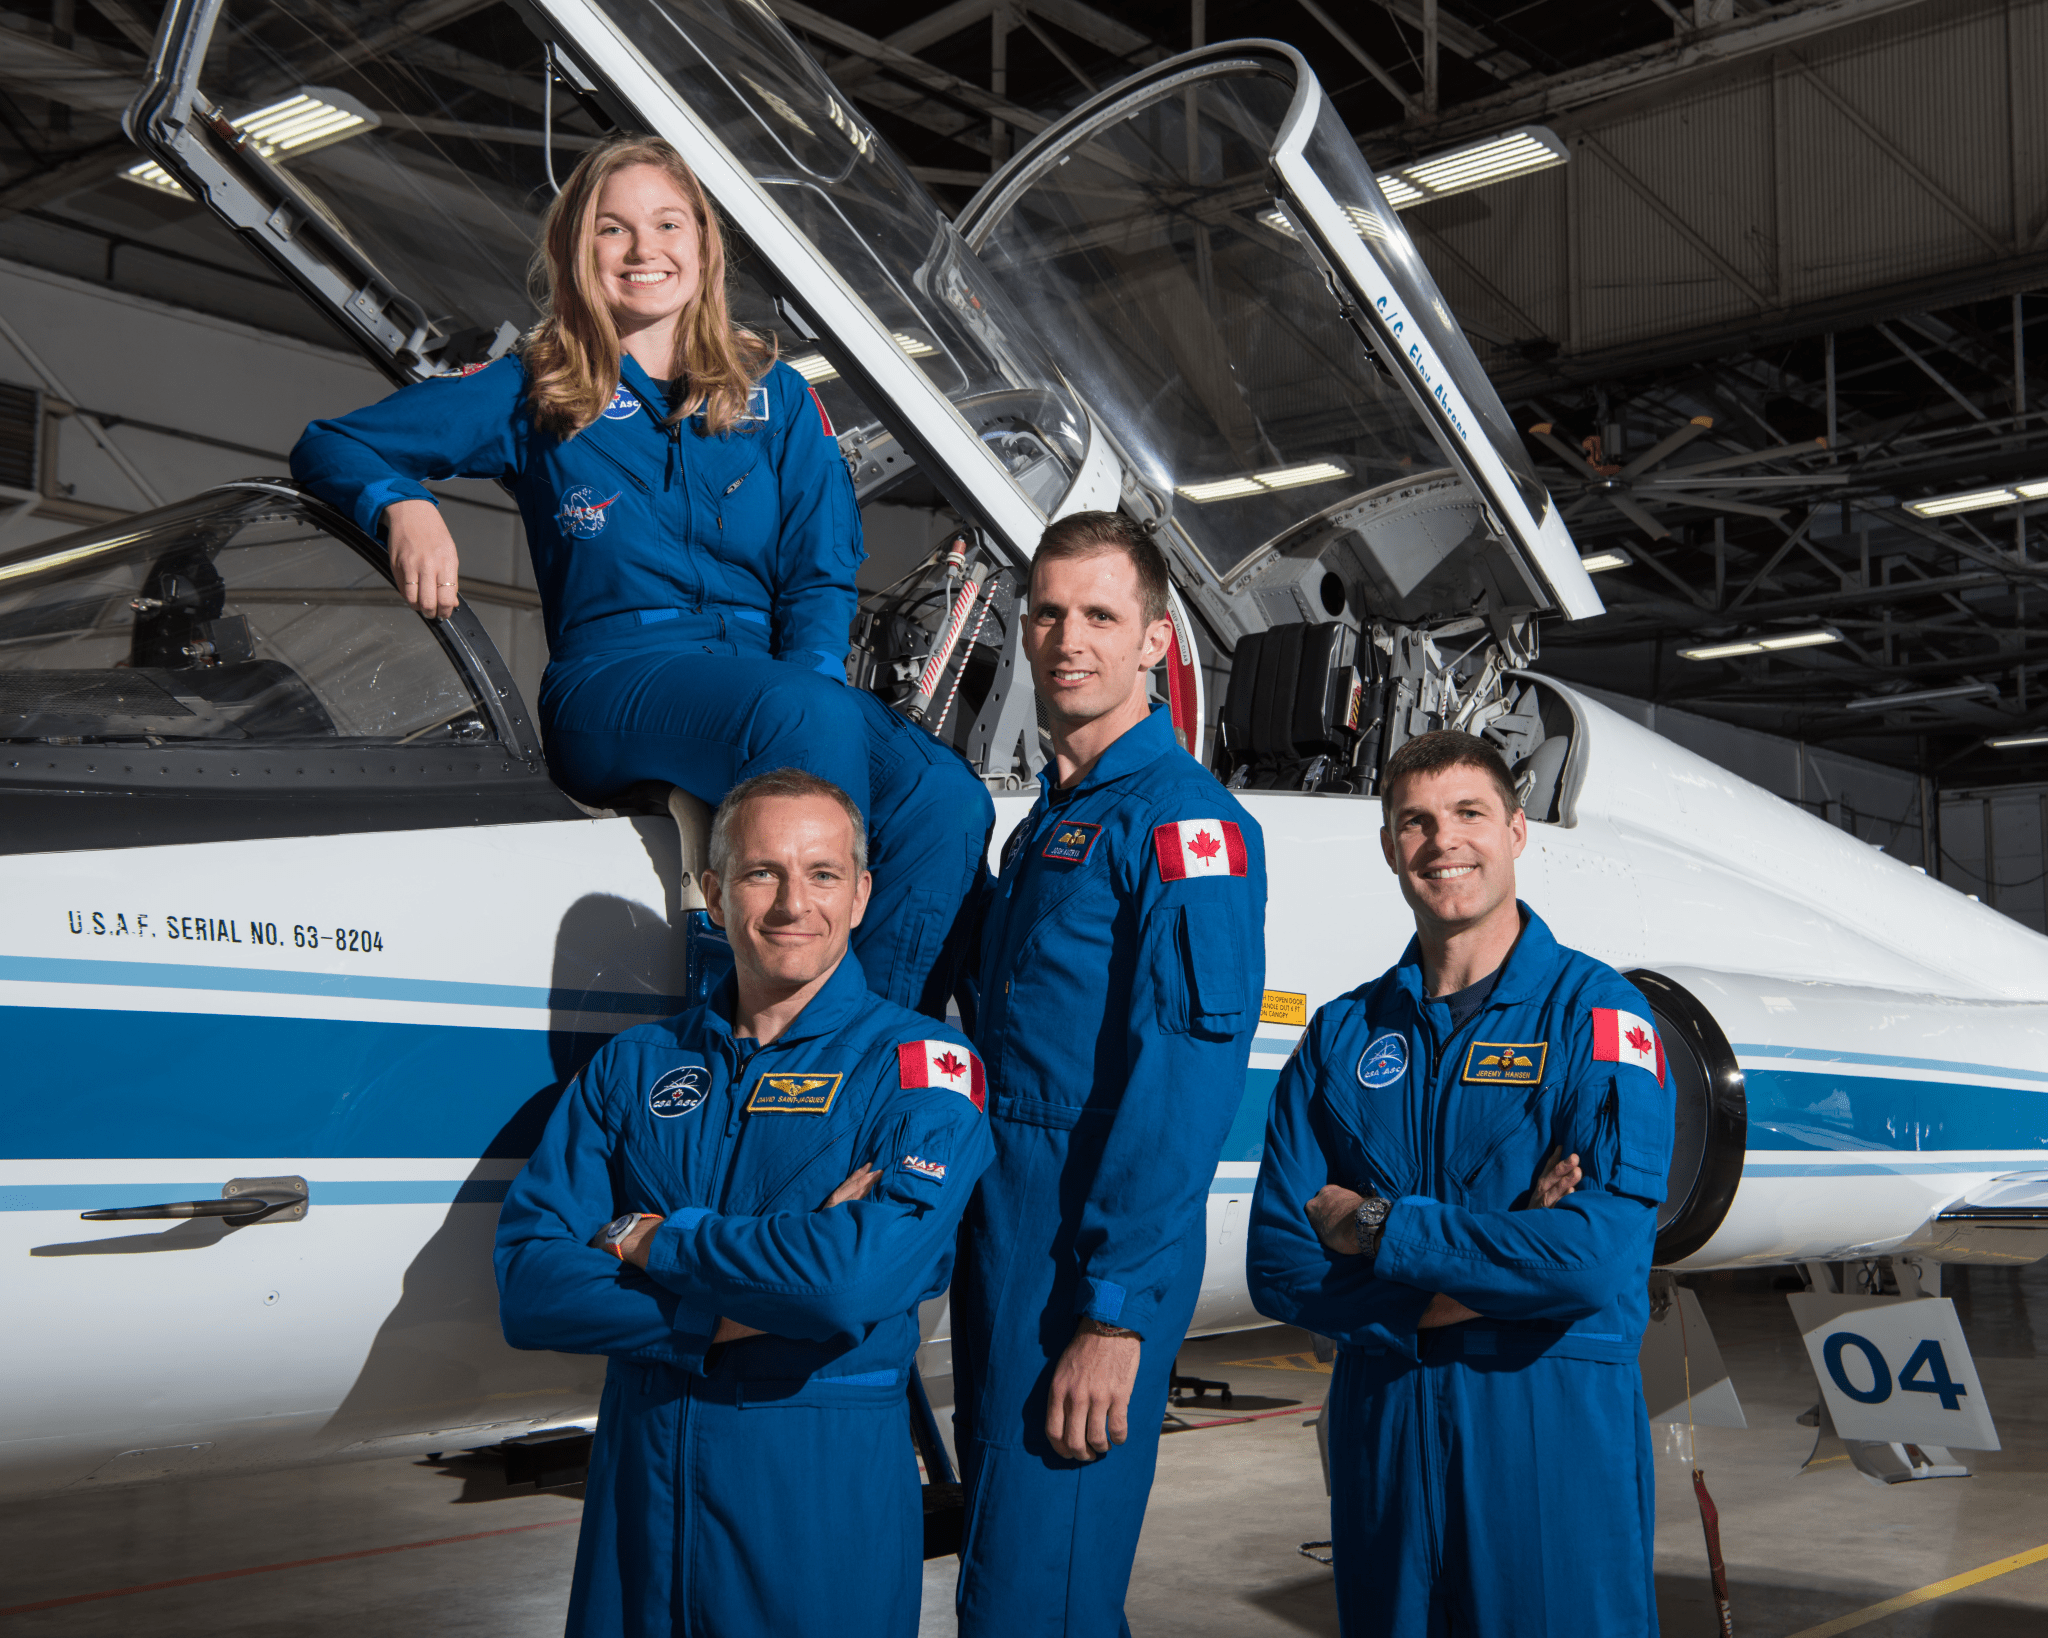 image of a group of astronauts near a plane